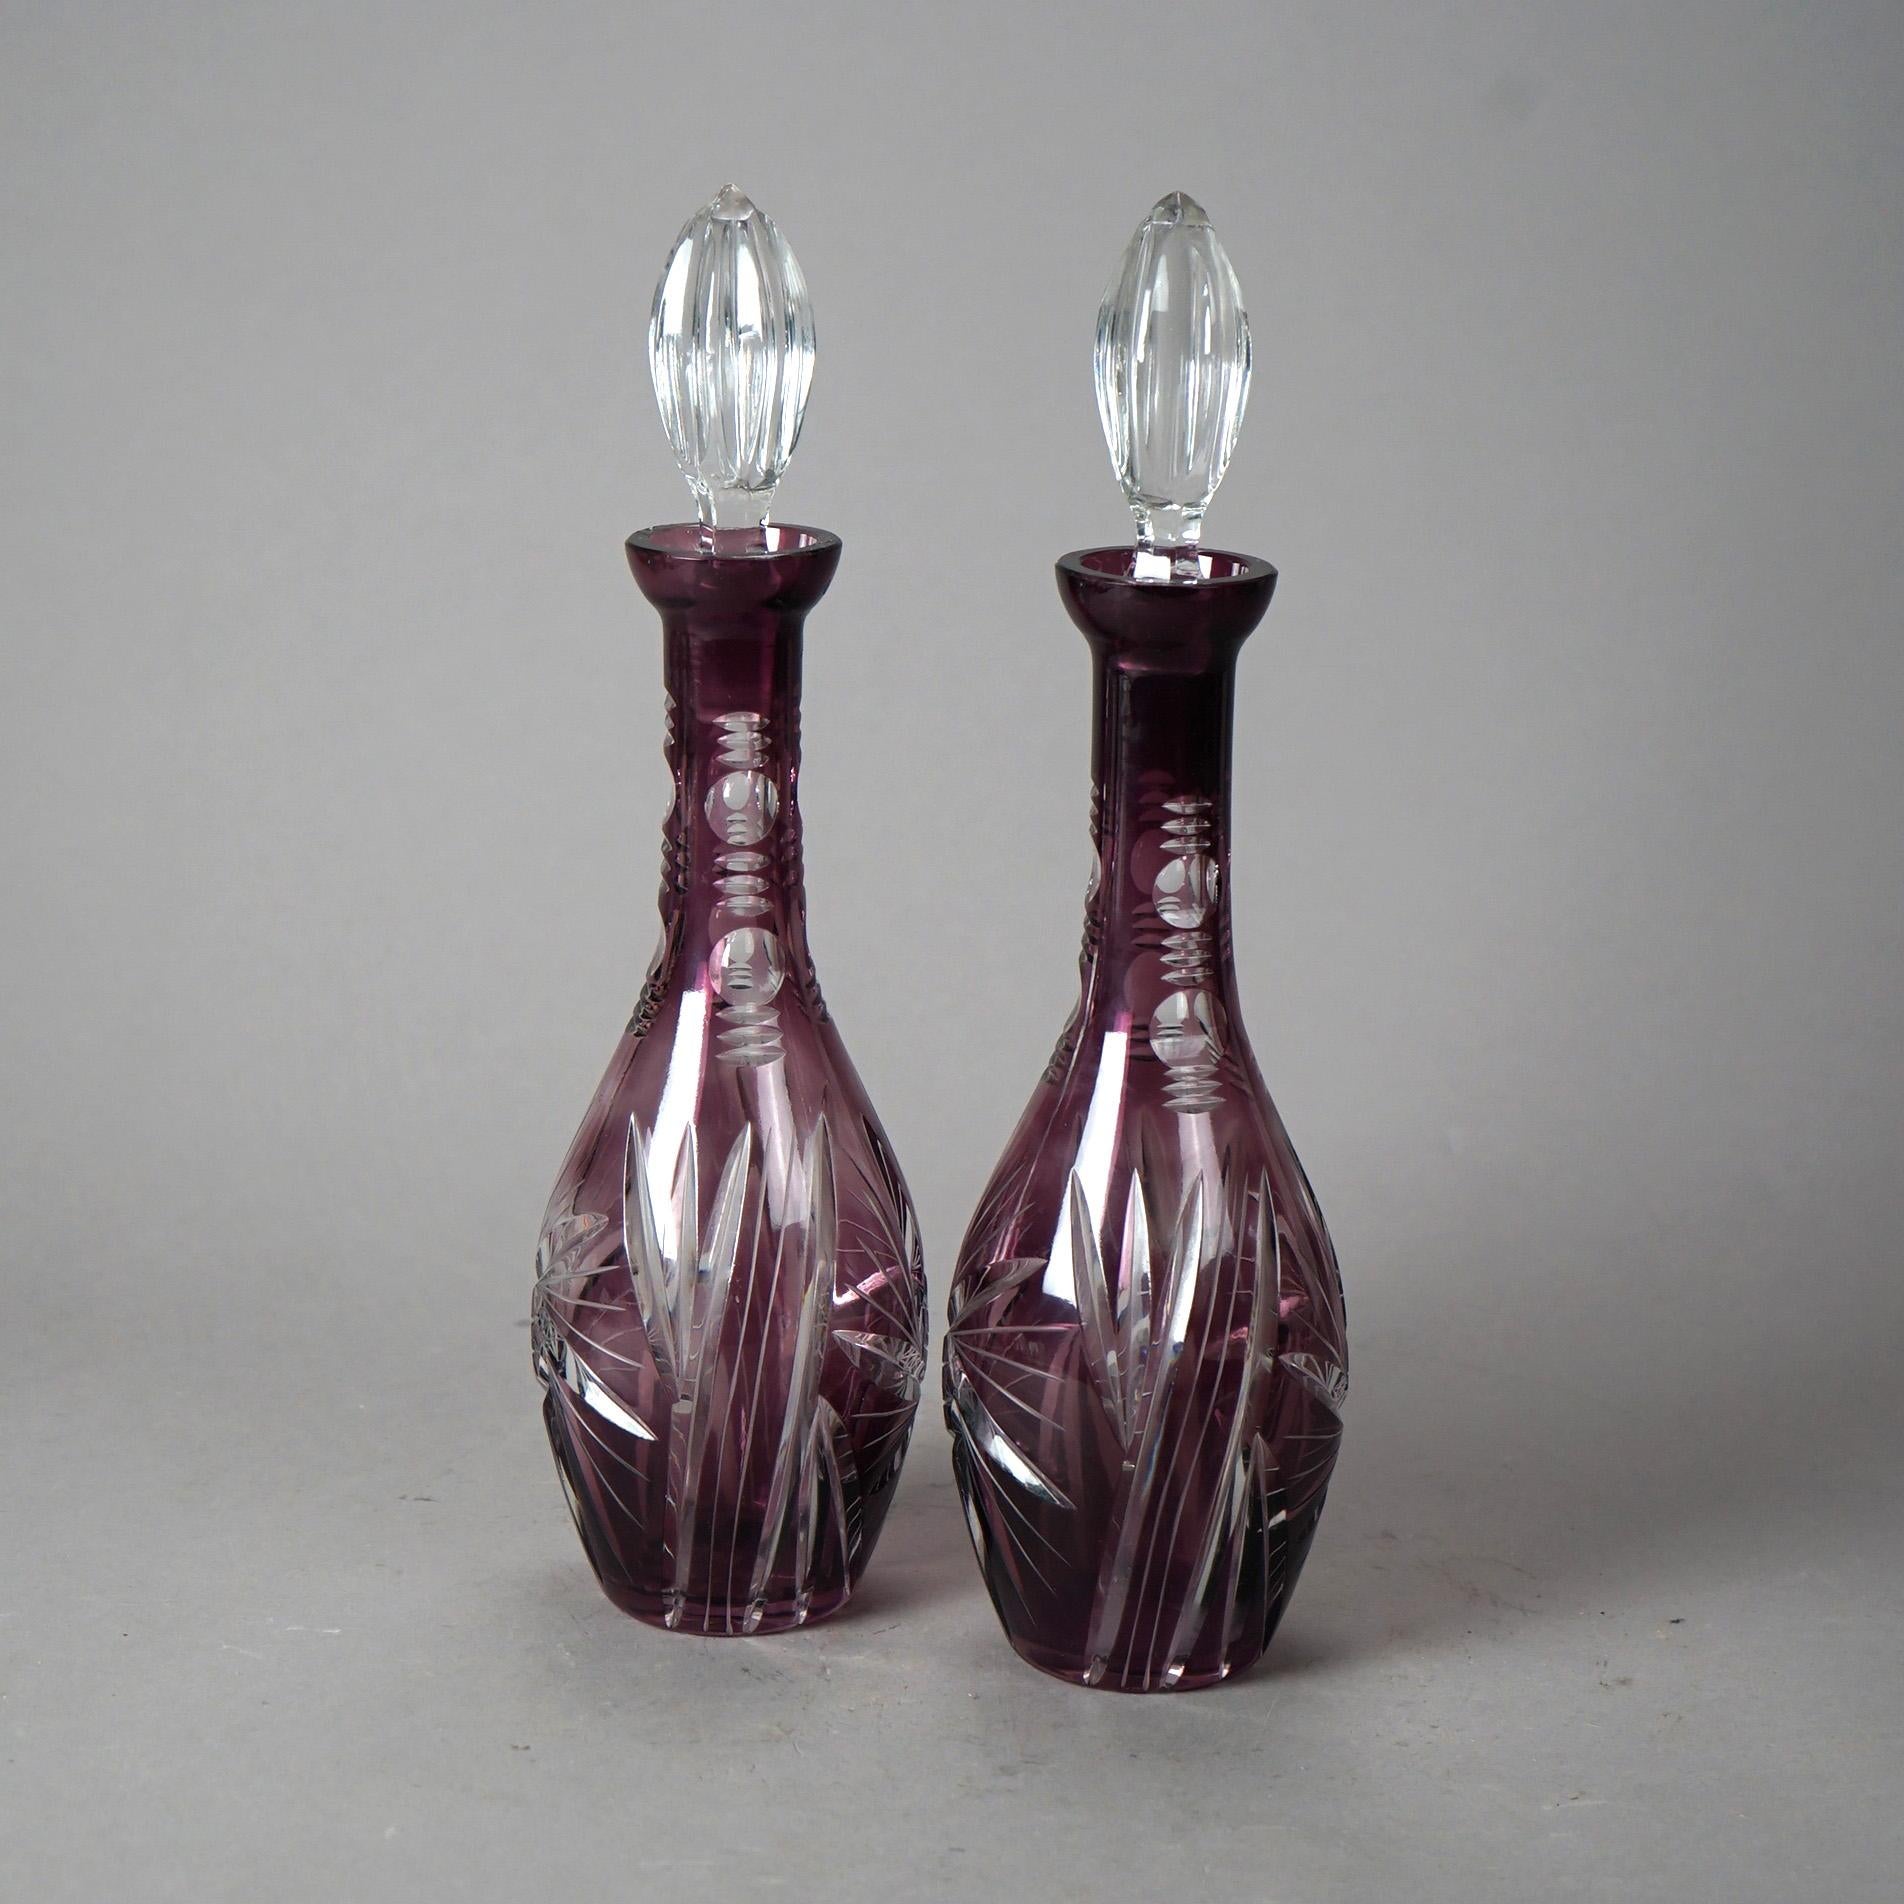 An antique pair of Bohemian decanters offer amethyst cut to clear glass construction with sunburst design and stoppers, circa 1920

Measures - 14.25